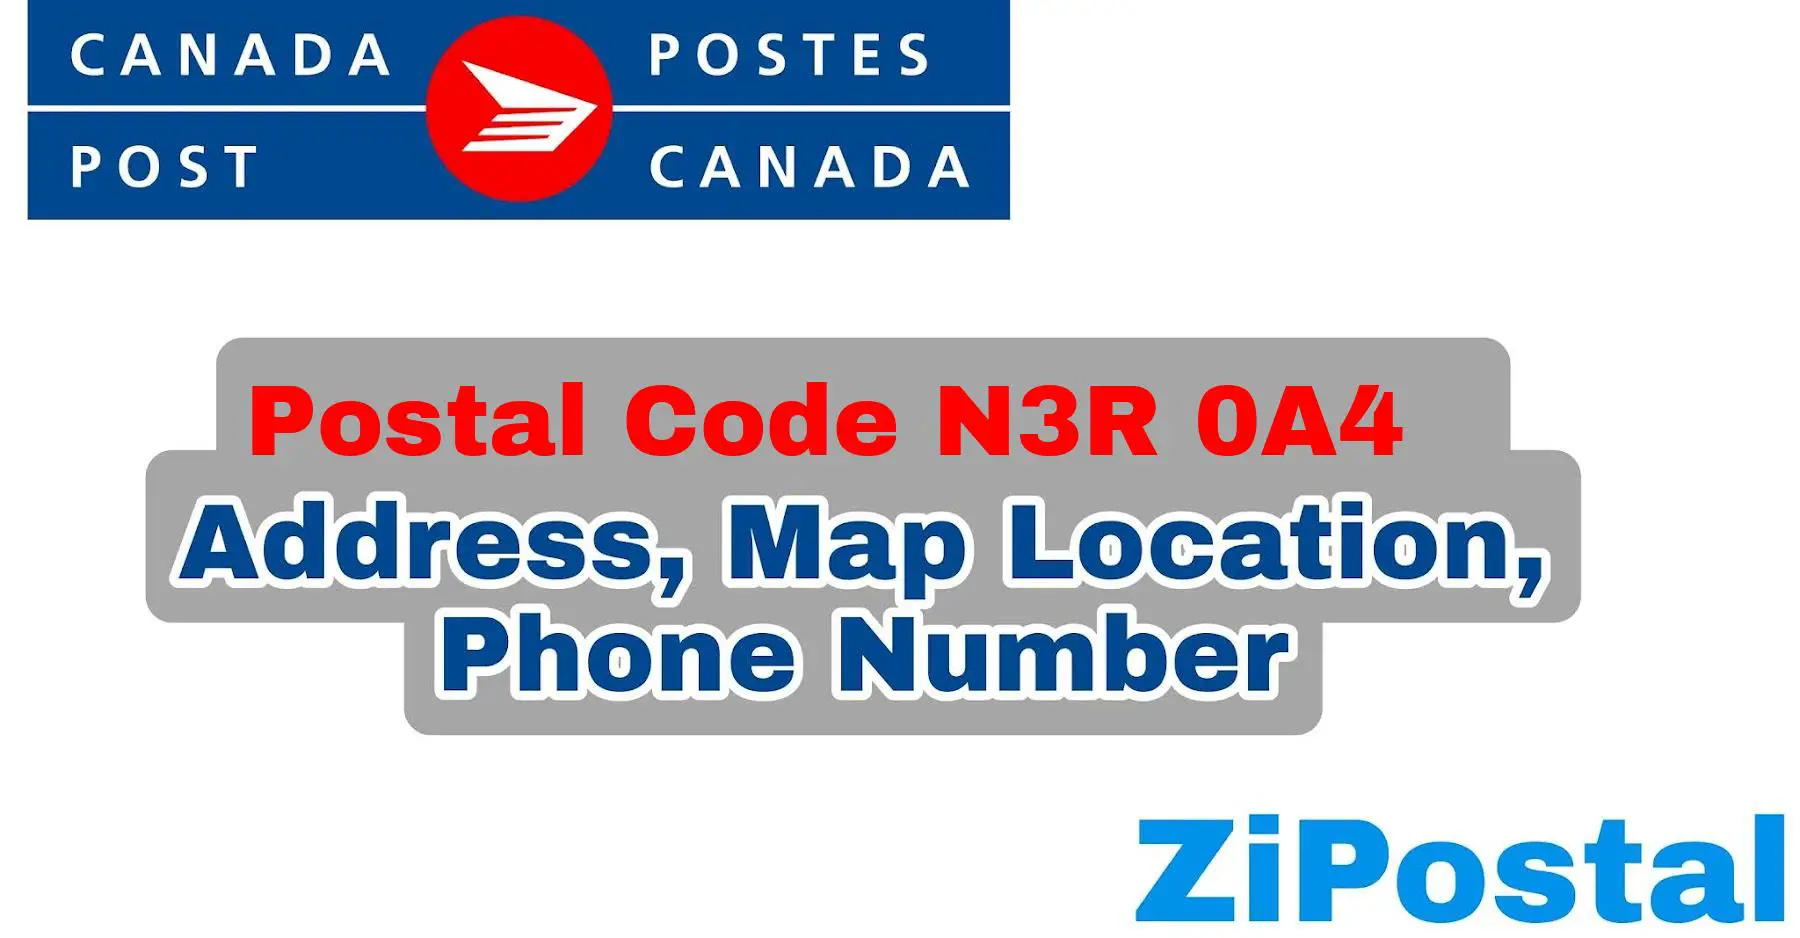 Postal Code N3R 0A4 Address Map Location and Phone Number